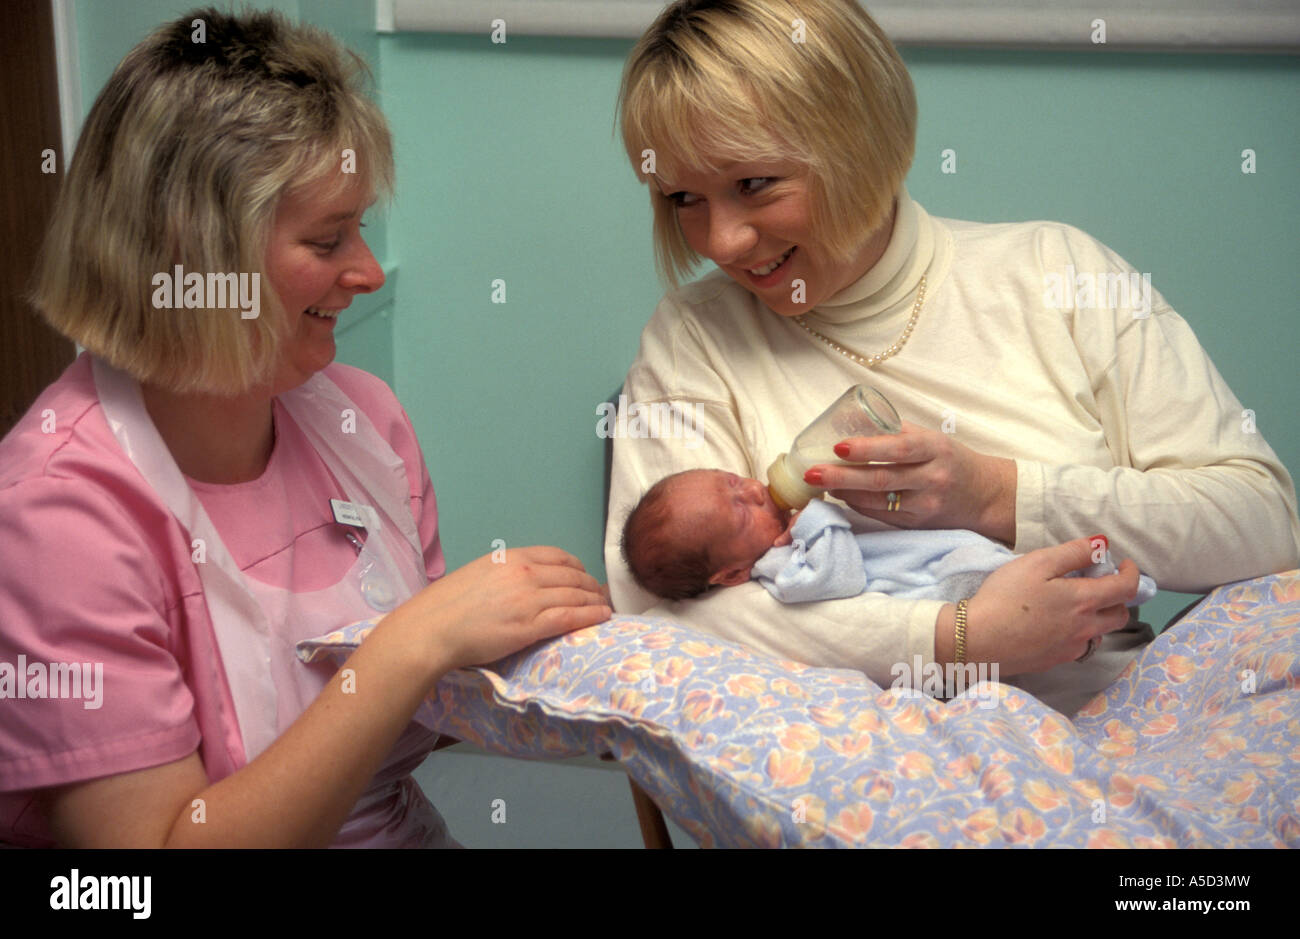 nurse or midwife helping new mother bottlefeed her baby in hospital Stock Photo